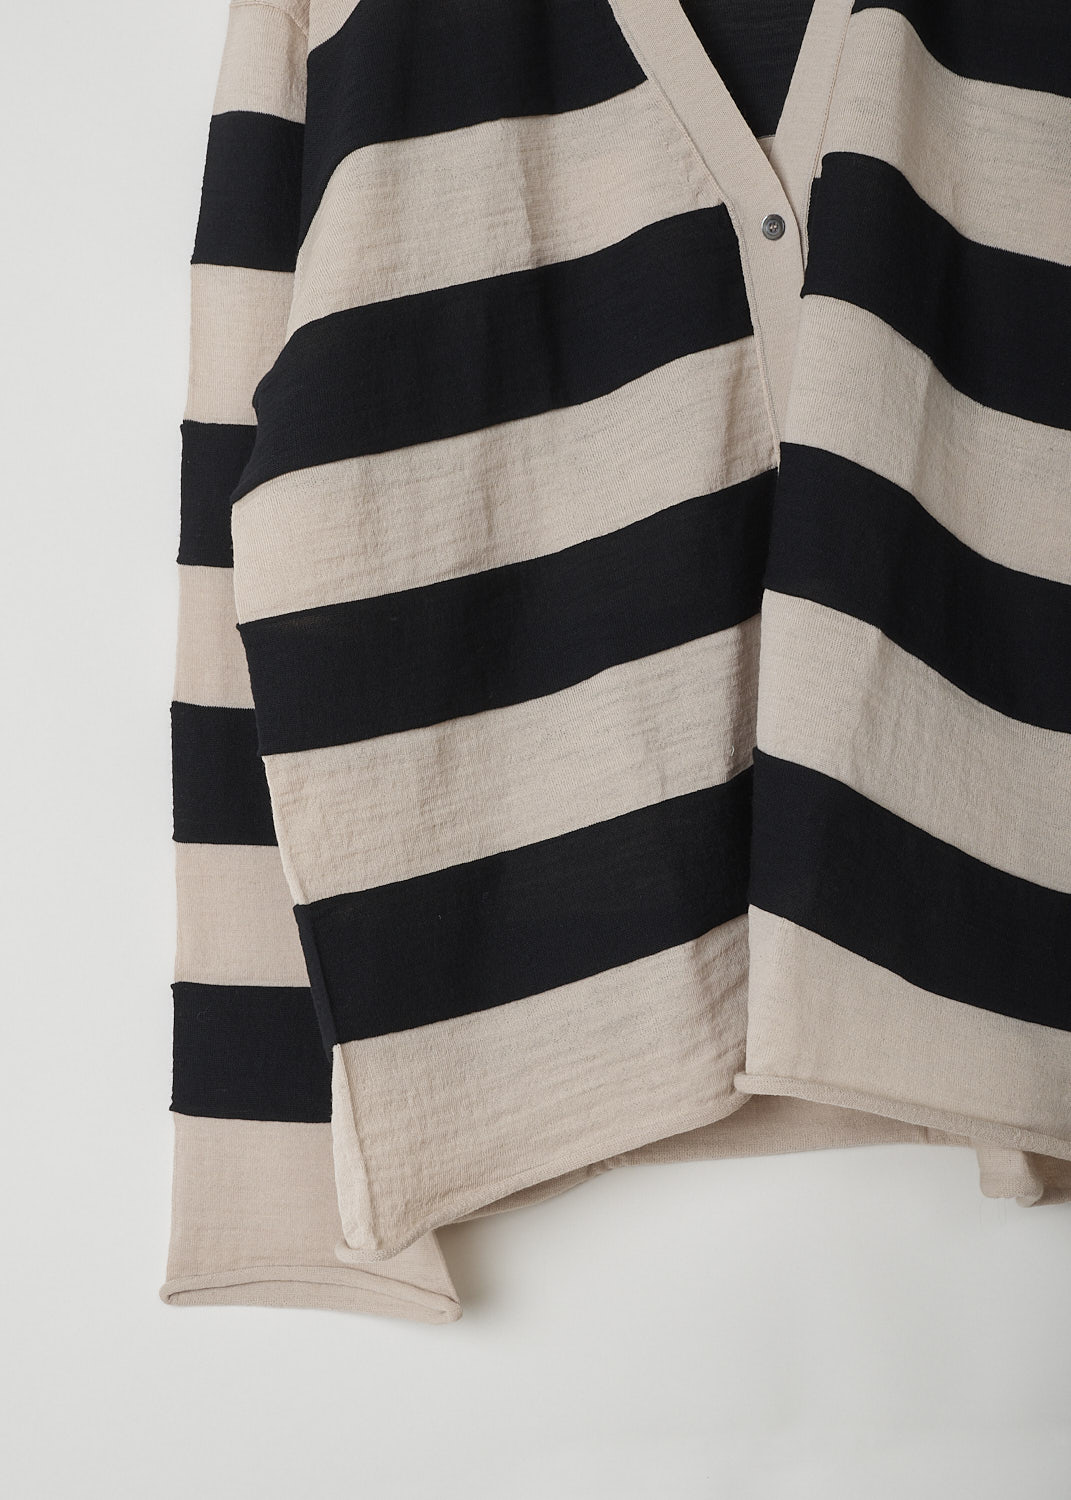 SOFIE D’HOORE, BEIGE AND BLACK STRIPED CARDIGAN, MANIA_YFIMBI_SAAND_BLACK, Beige, Black, Detail, This beige and black striped wool cardigan has a V-neckline and a front button closure. The cuffs and hemline have a rolled hemline. The cardigan has a wider silhouette. 
